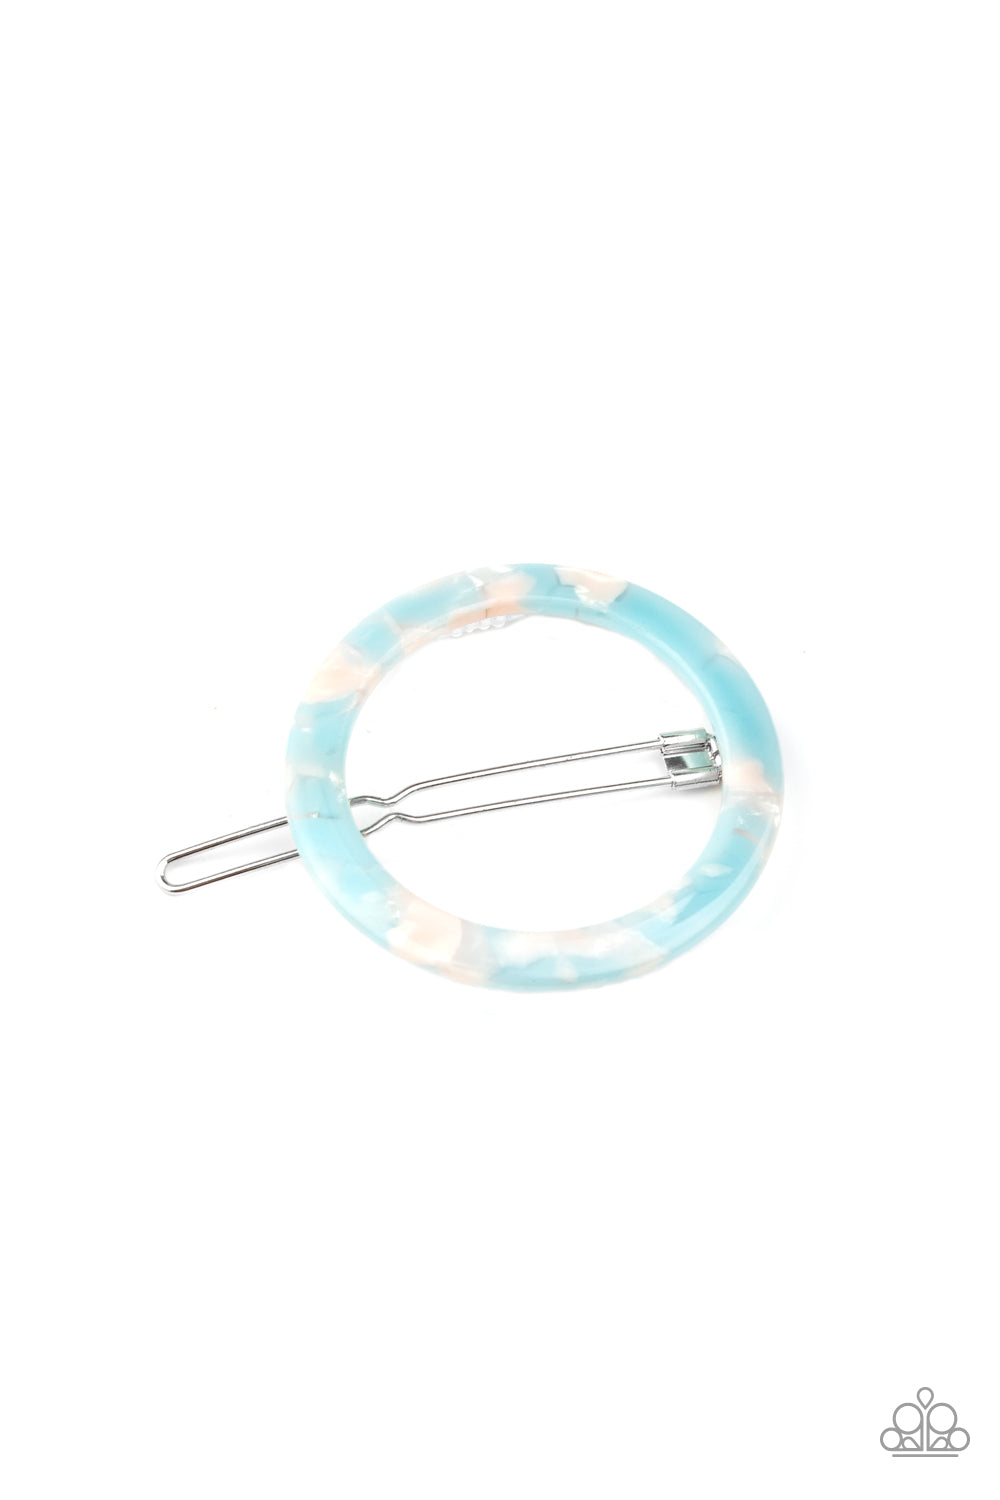 In The Round - Paparazzi - Blue and Pink Acrylic Circle Hair Clip